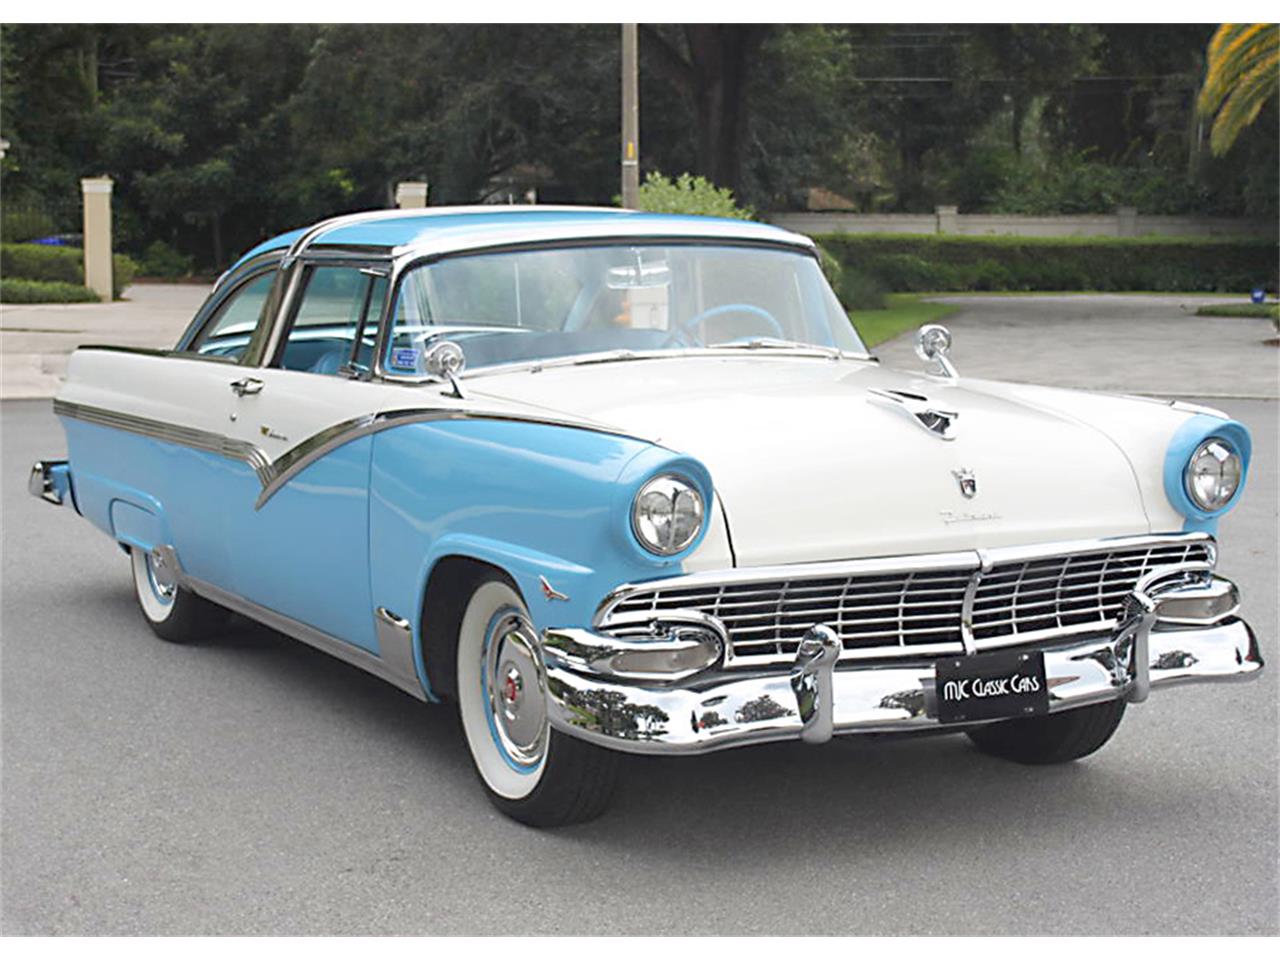 1956 Ford Crown Victoria for Sale | ClassicCars.com | CC-1138842